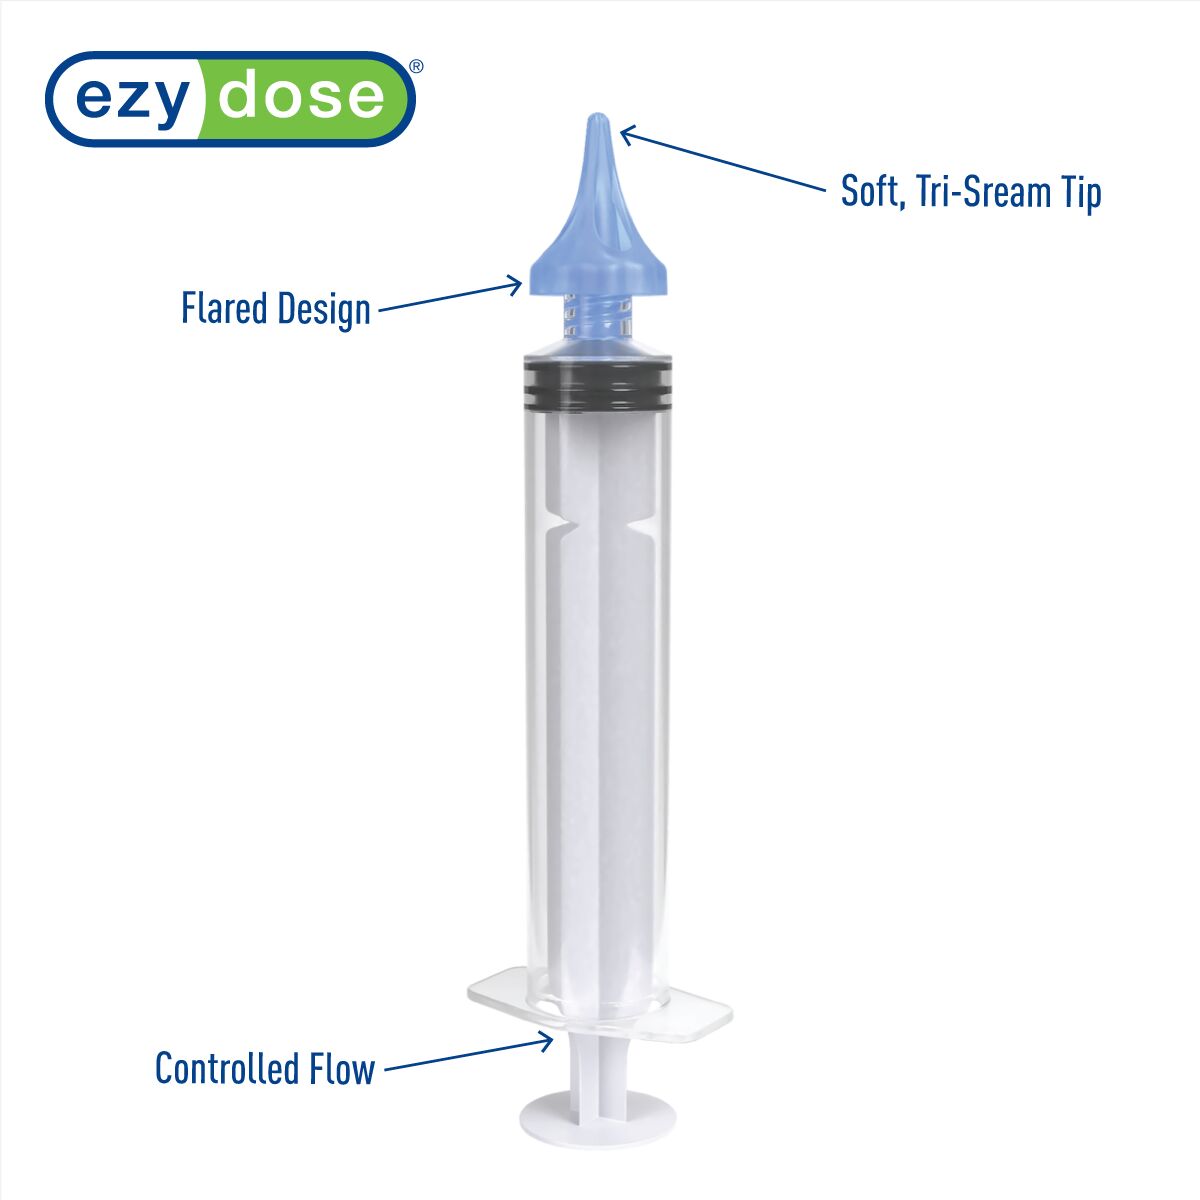 Ear wax removal syringe features a soft, tri-stream tip, flared design and controlled flow